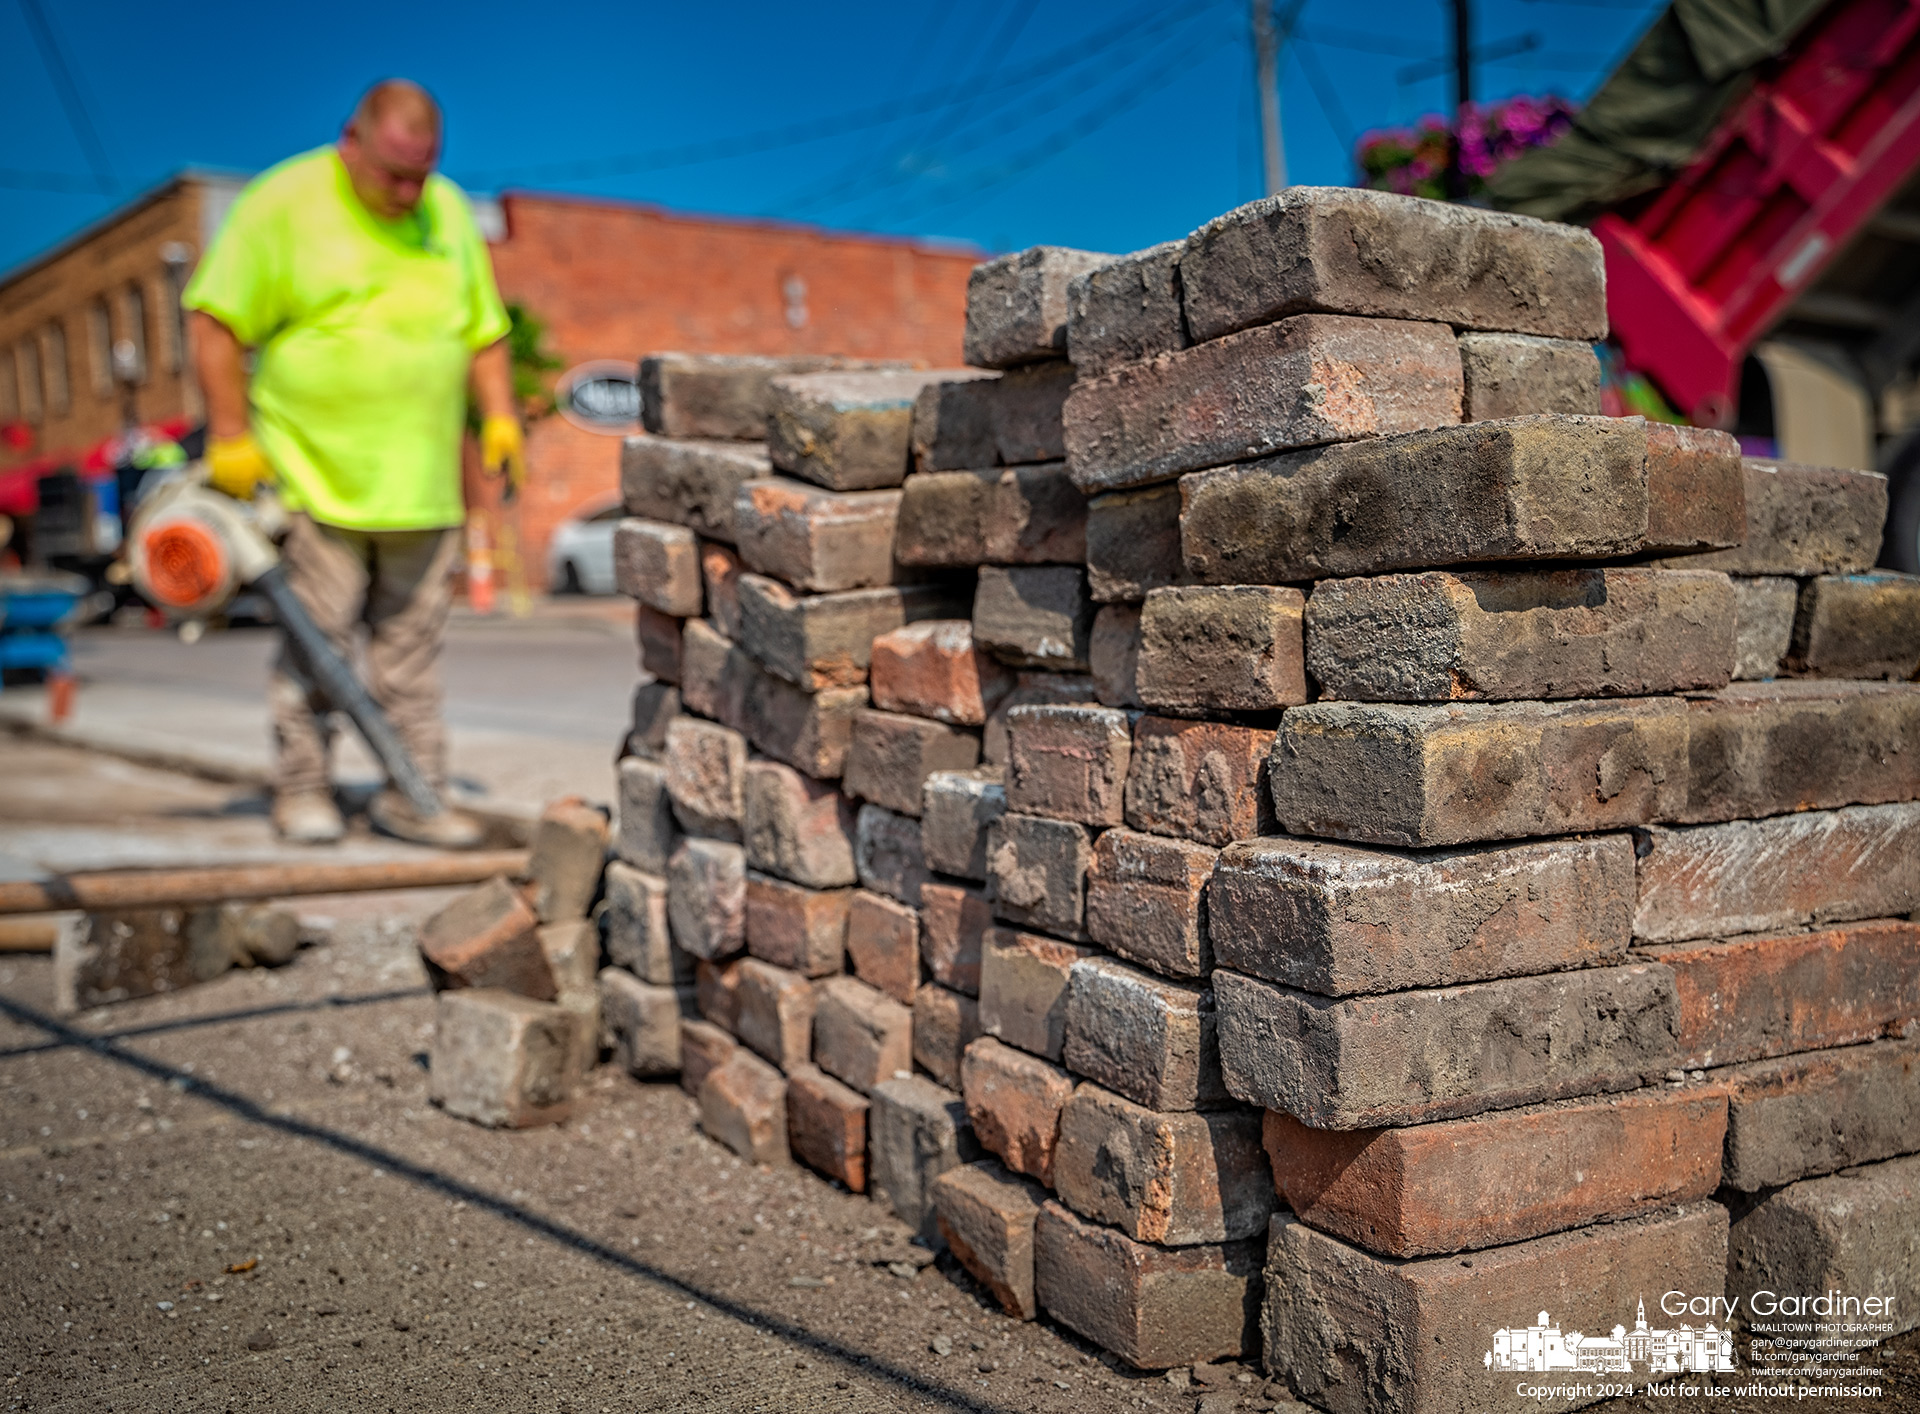 A stack of recycled pavers is waiting to be reinstalled at an entrance to a parking lot on East Main Street after sections of the cubs and gutters have been replaced. My Final Photo for July 23, 2024.